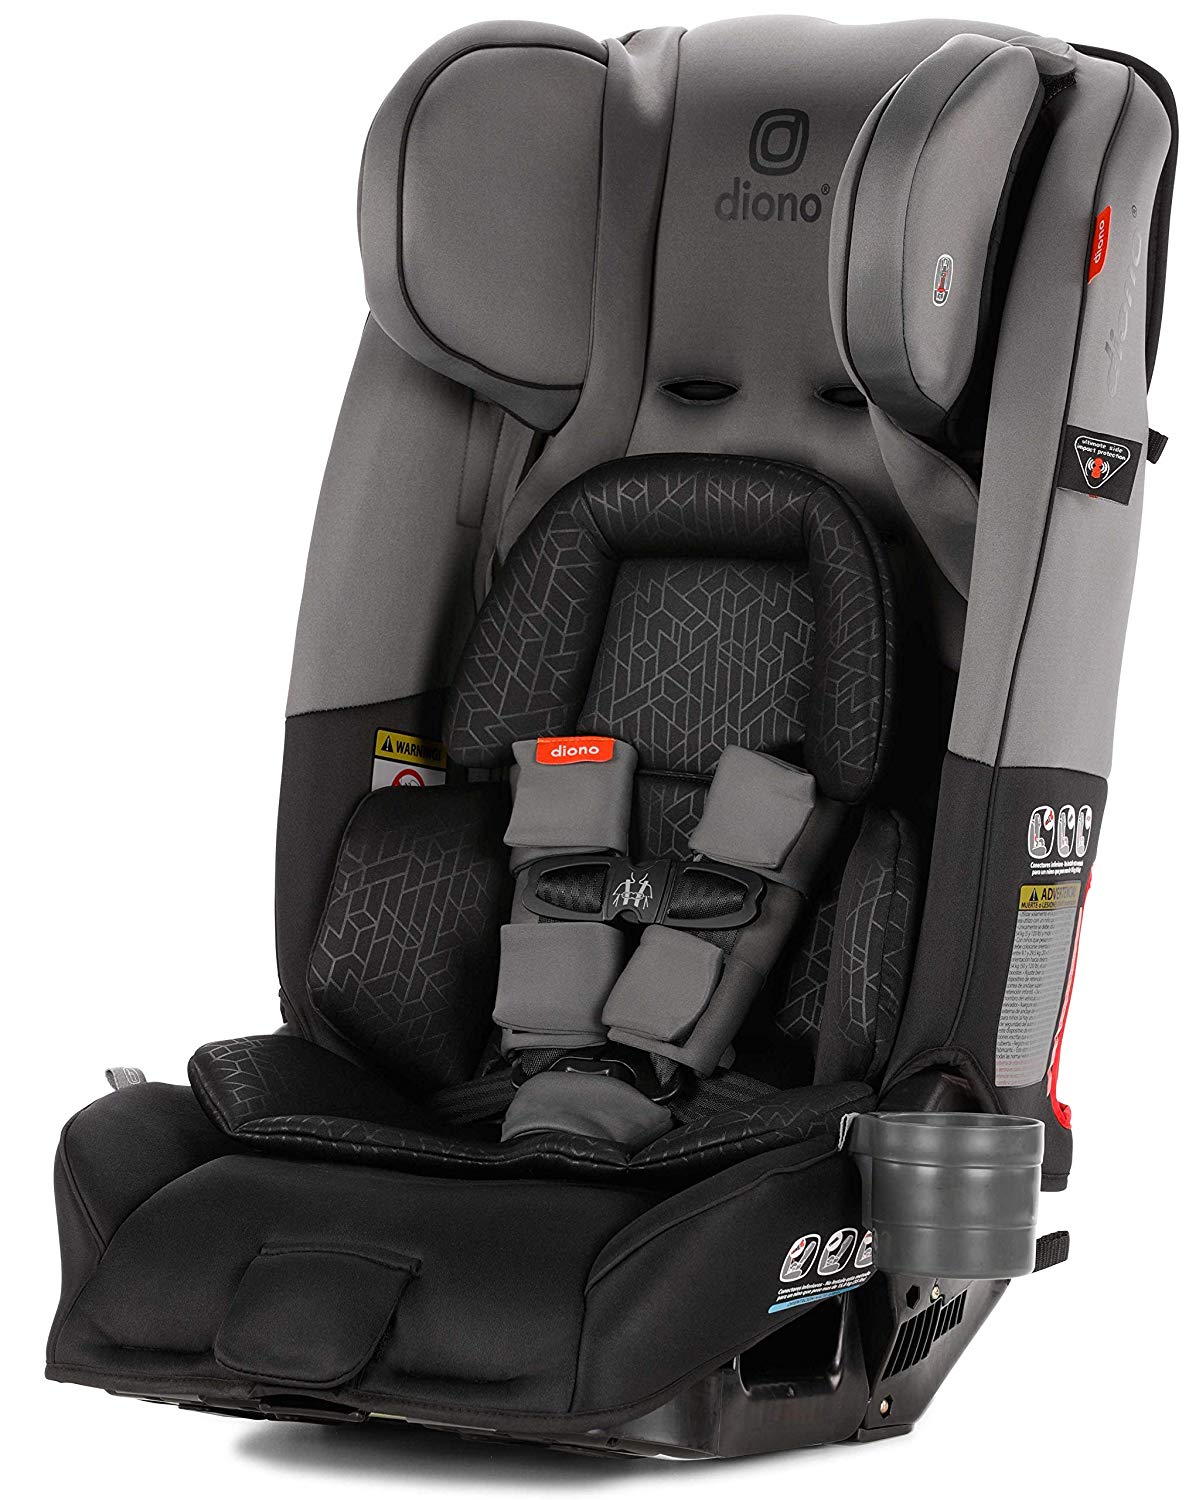 What to look for when buying a car seat for kids?